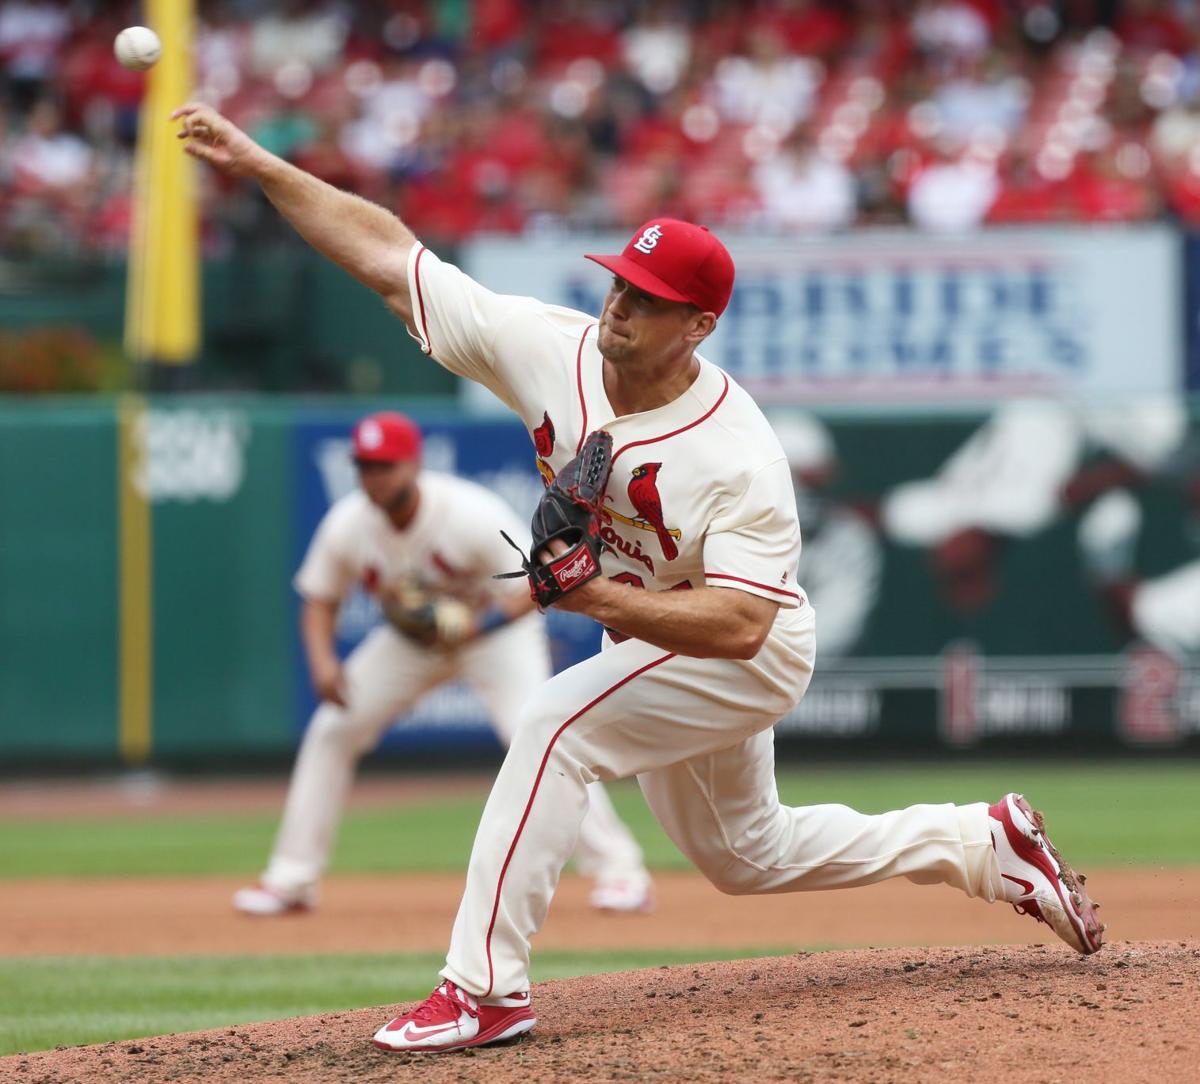 Rosenthal comes up big for Cardinals | St. Louis Cardinals | www.semadata.org